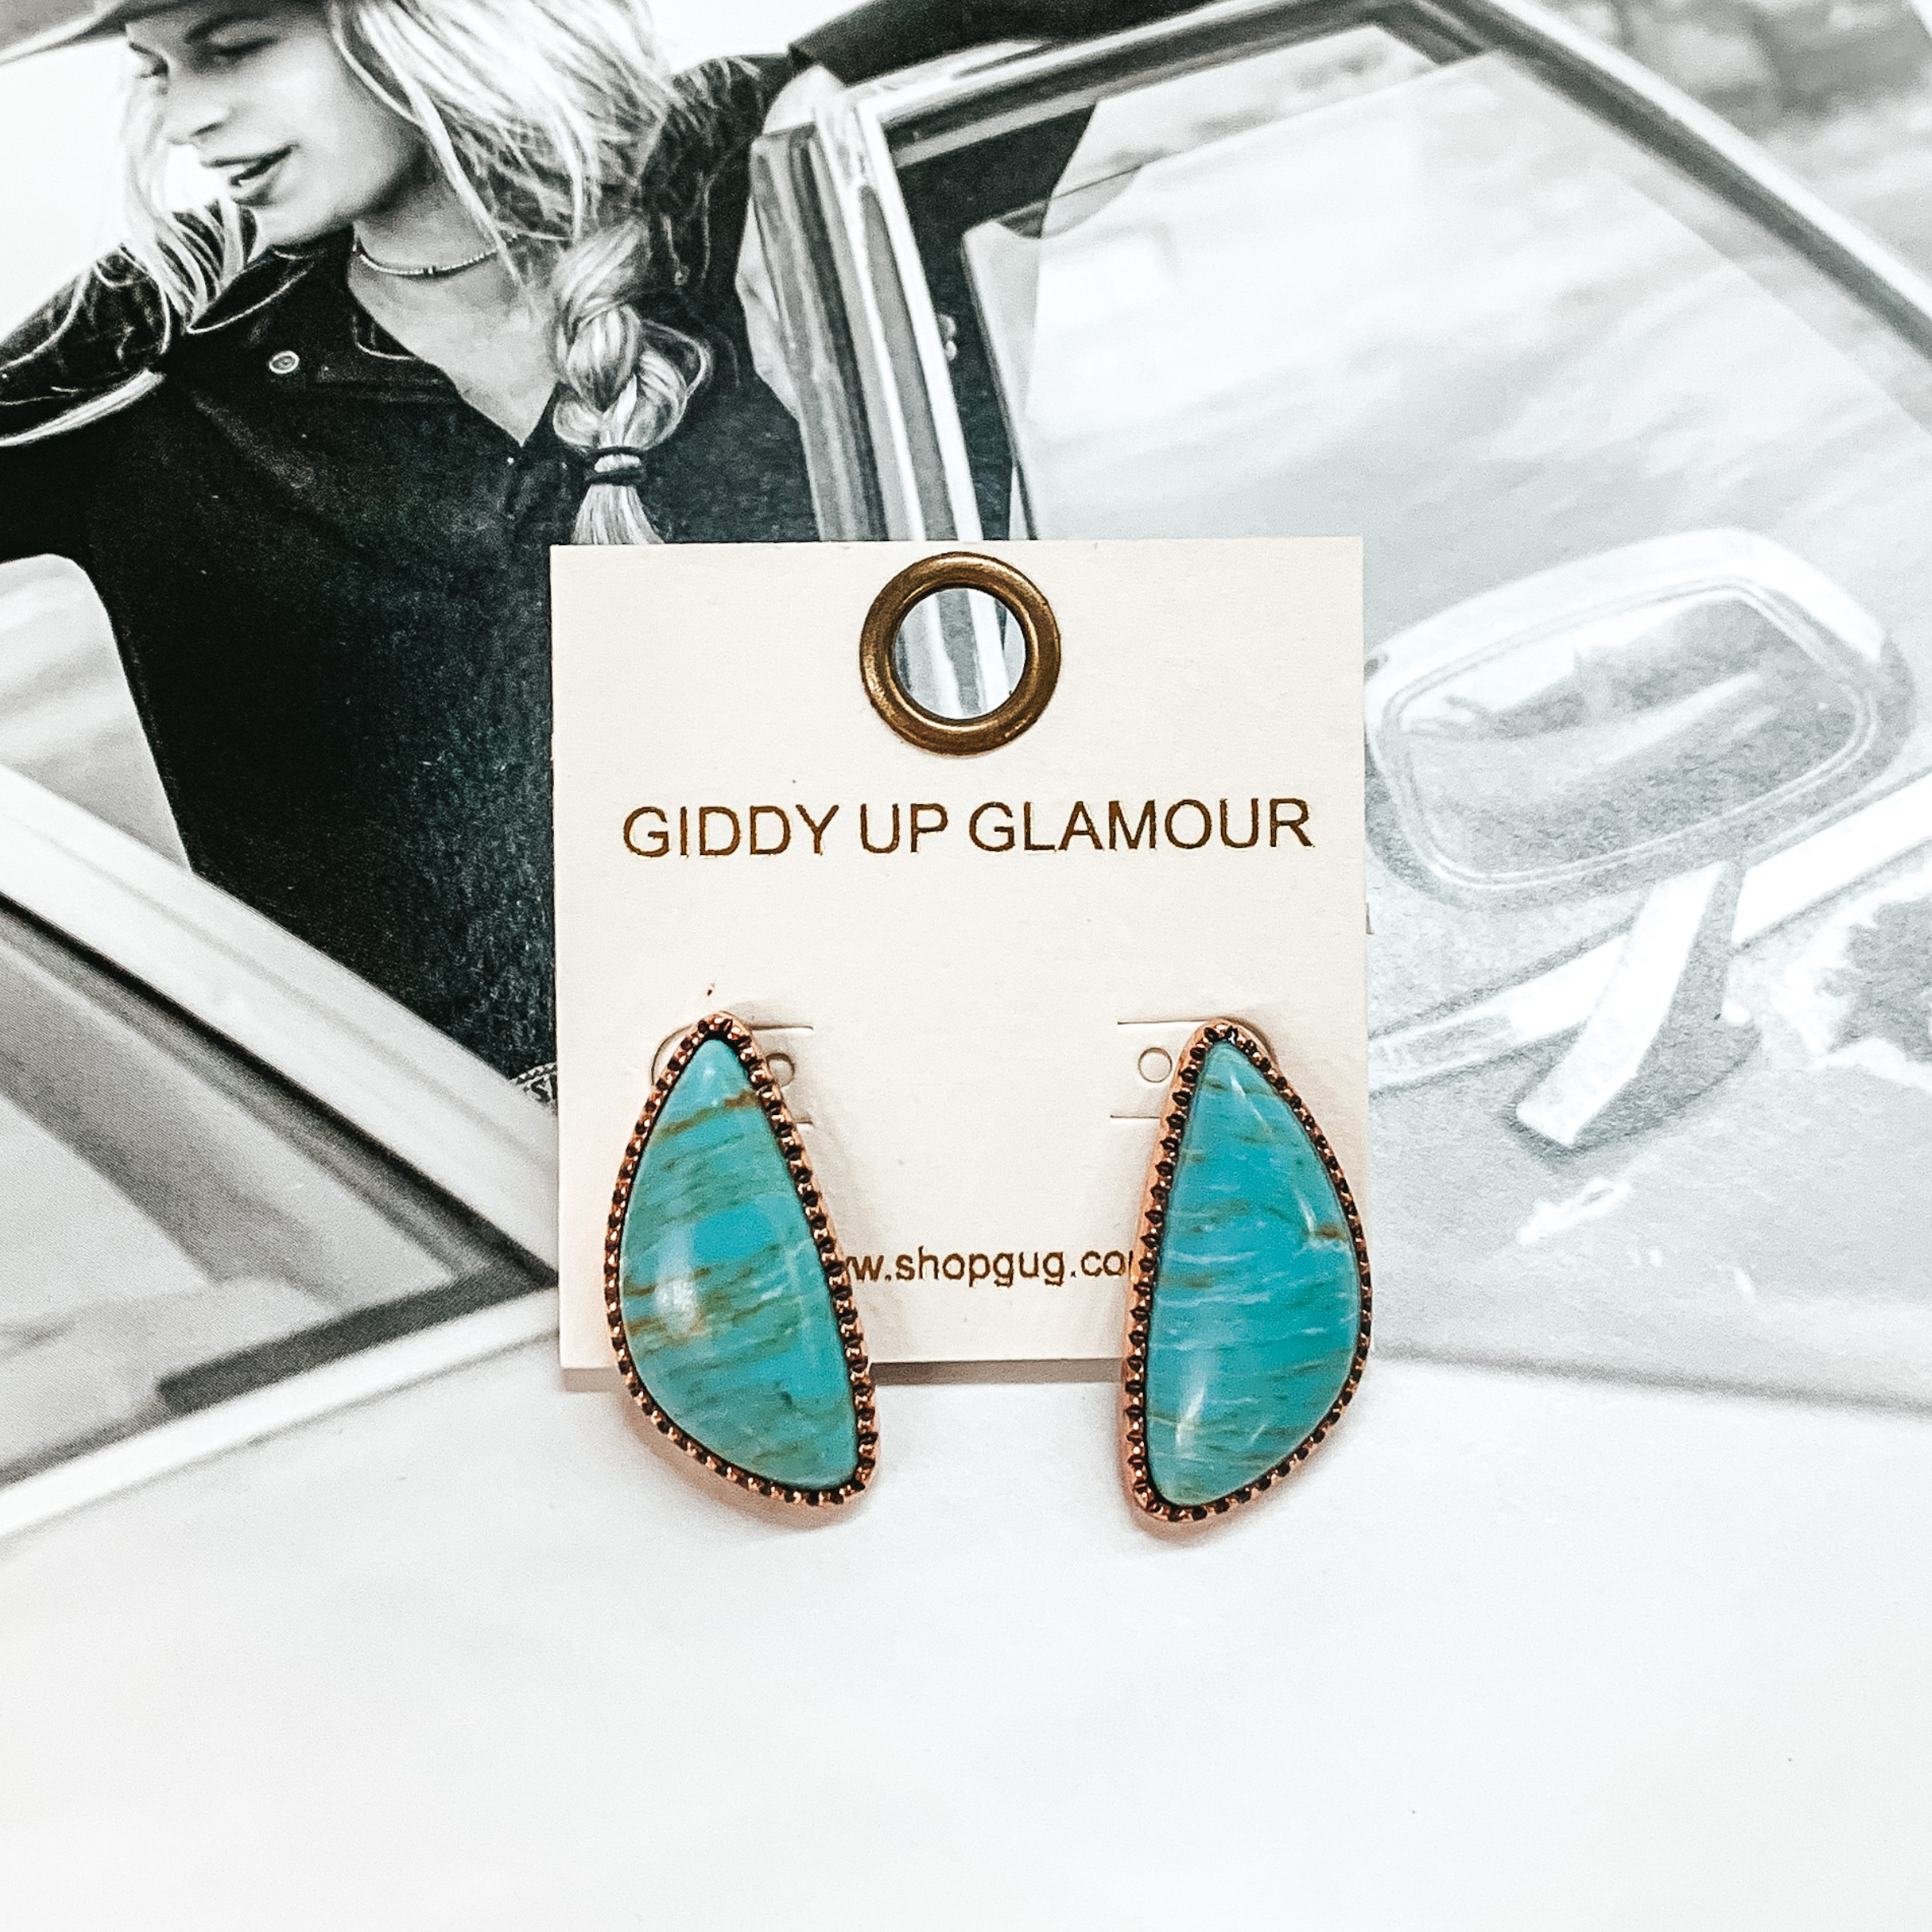 Irregular shaped turquoise stone stud earrings with a copper backing. These earrings are pictured on top of a black and white picture of a girl in a car. 